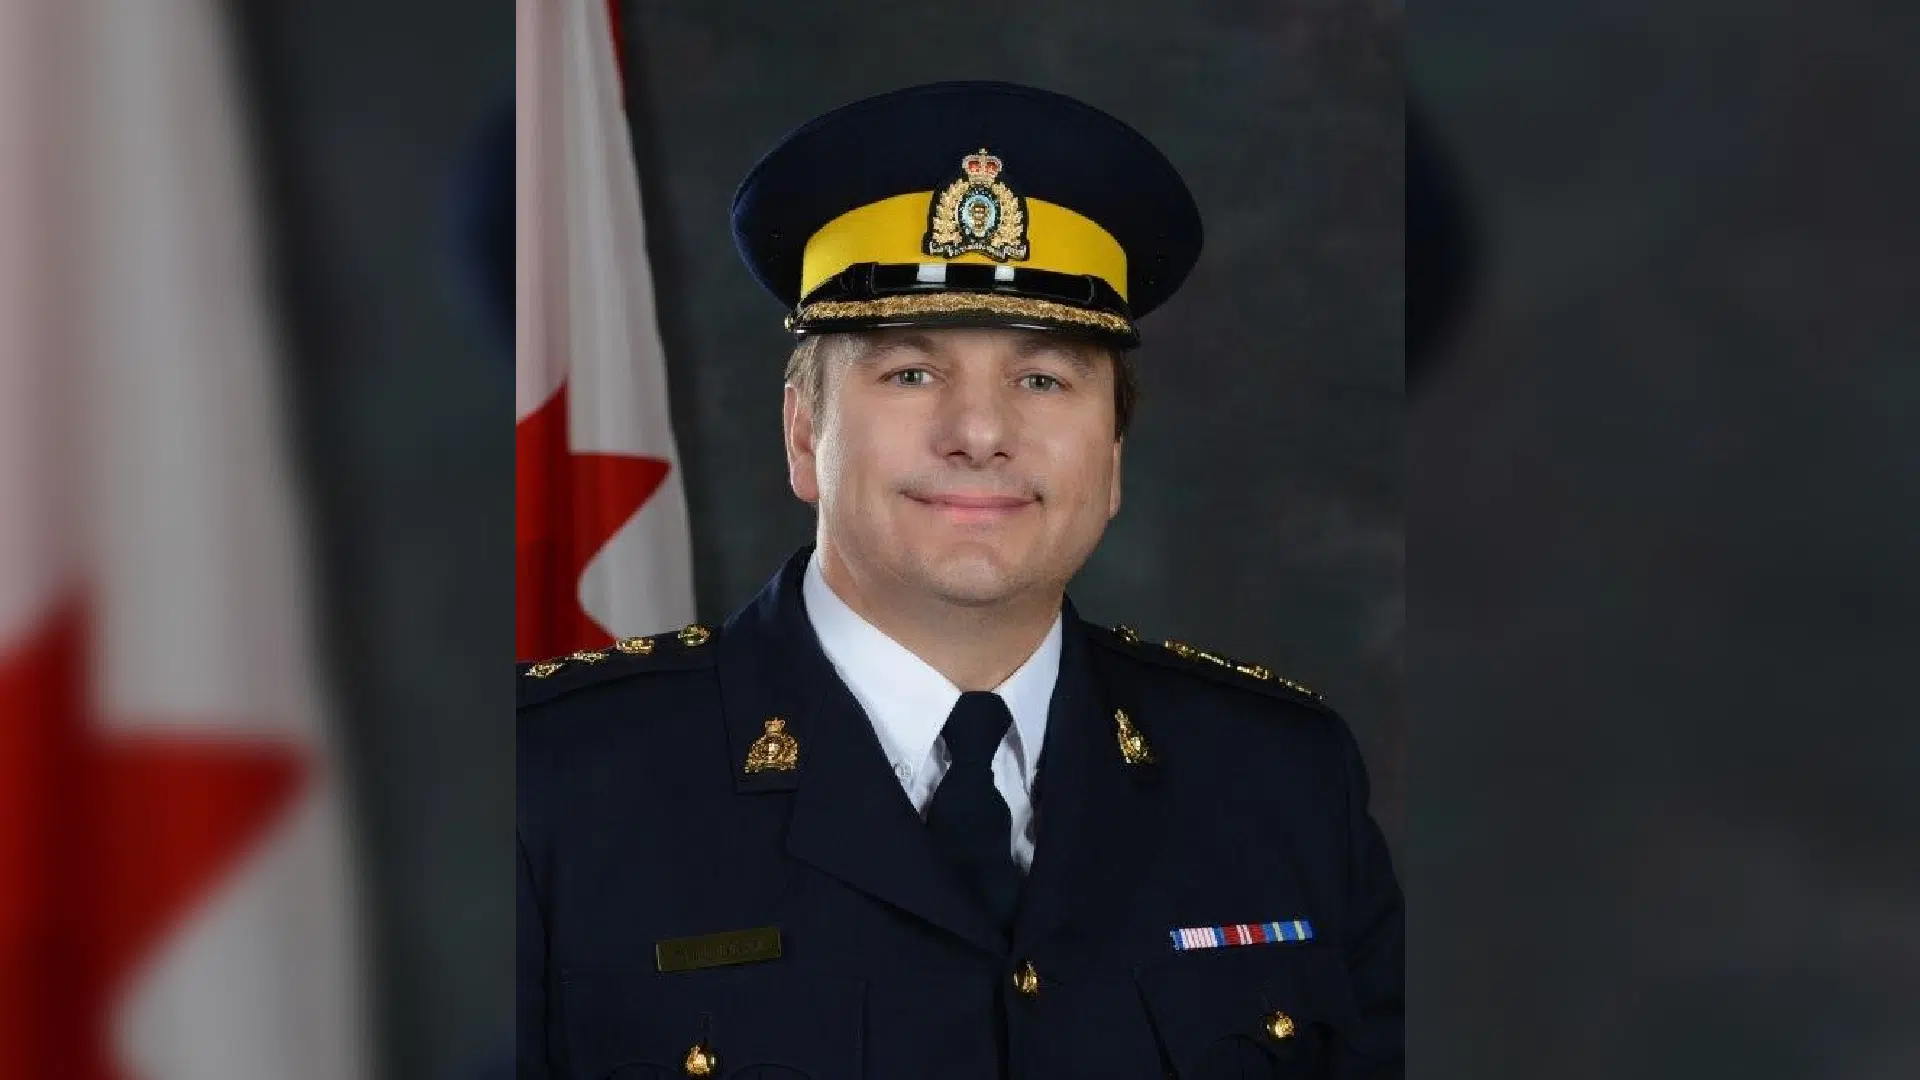 UPDATED: Saint John's Police Chief Is Resigning